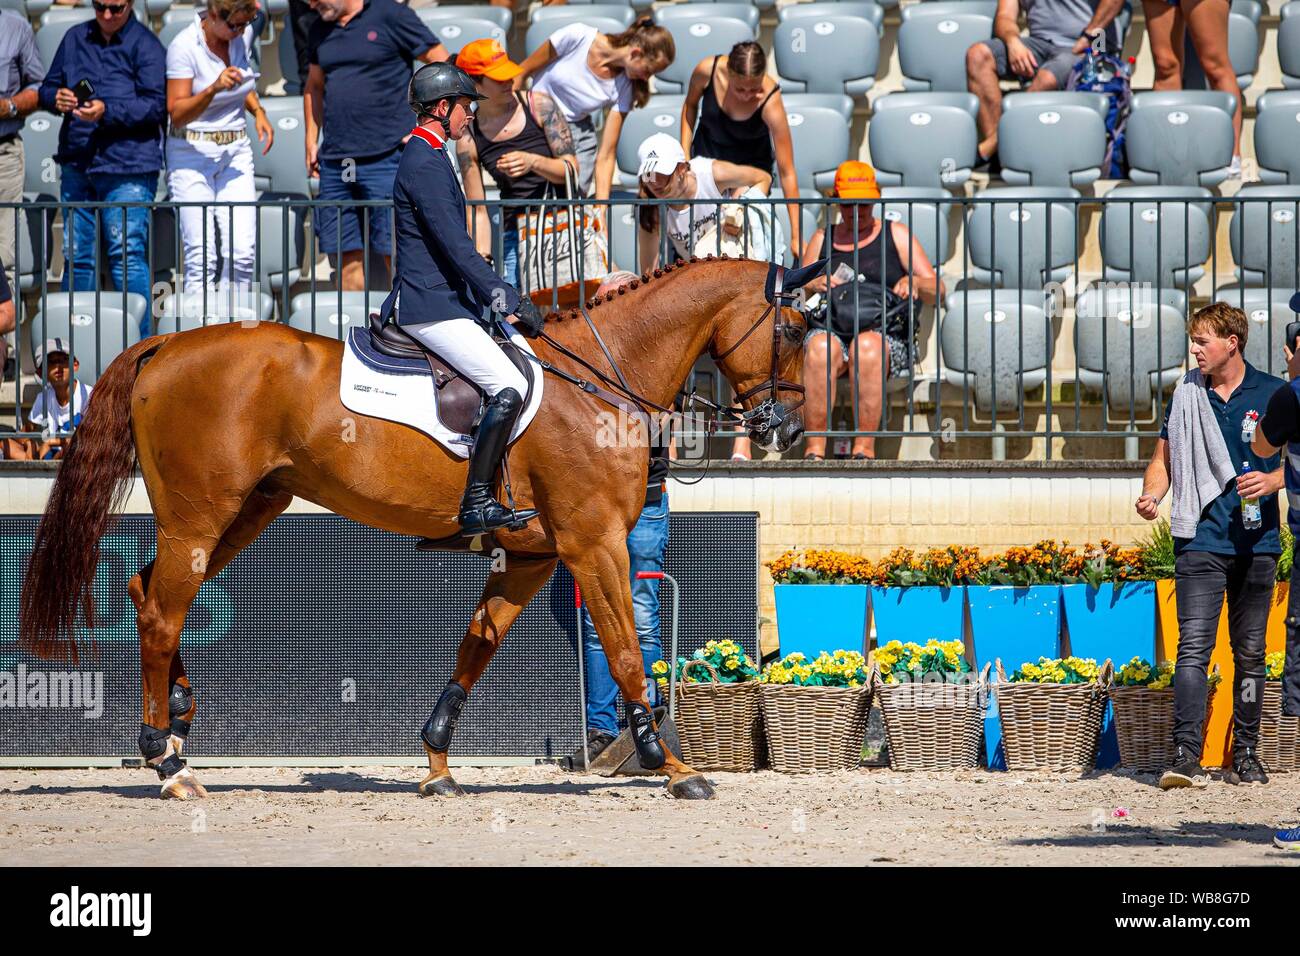 Rotterdam, Netherlands. 25th Aug, 2019. Ben Maher (GBR) riding Explosion W in the Individual Final Round A at the at the Longines FEI European Championships. Showjumping. Credit Elli Birch/SIP photo agency/Alamy live news. Credit: Sport In Pictures/Alamy Live News Stock Photo